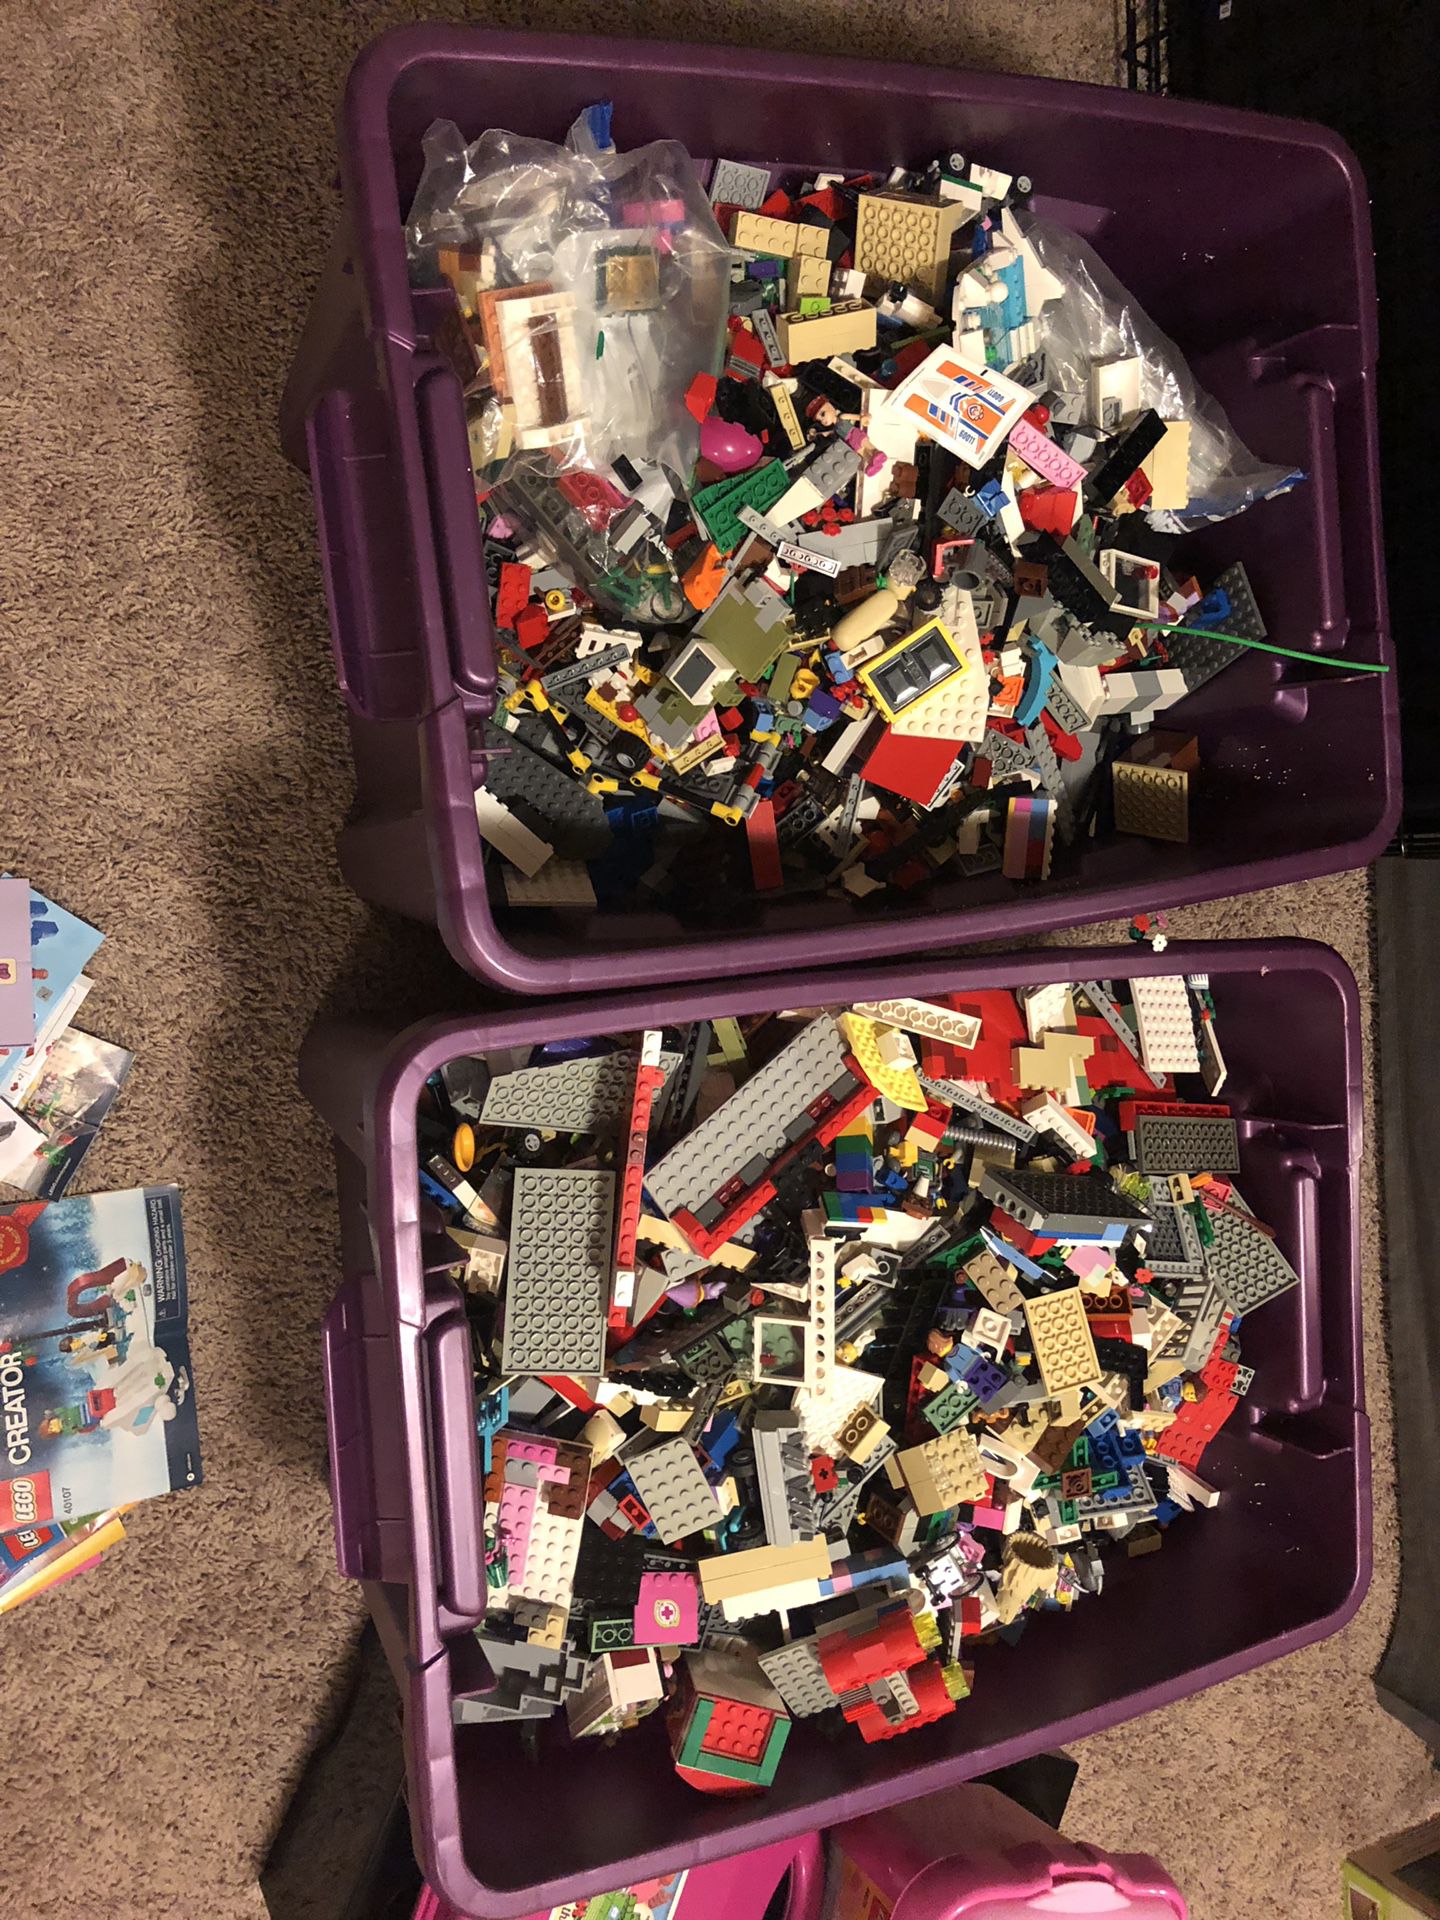 Over 75 LEGO sets and accessories.